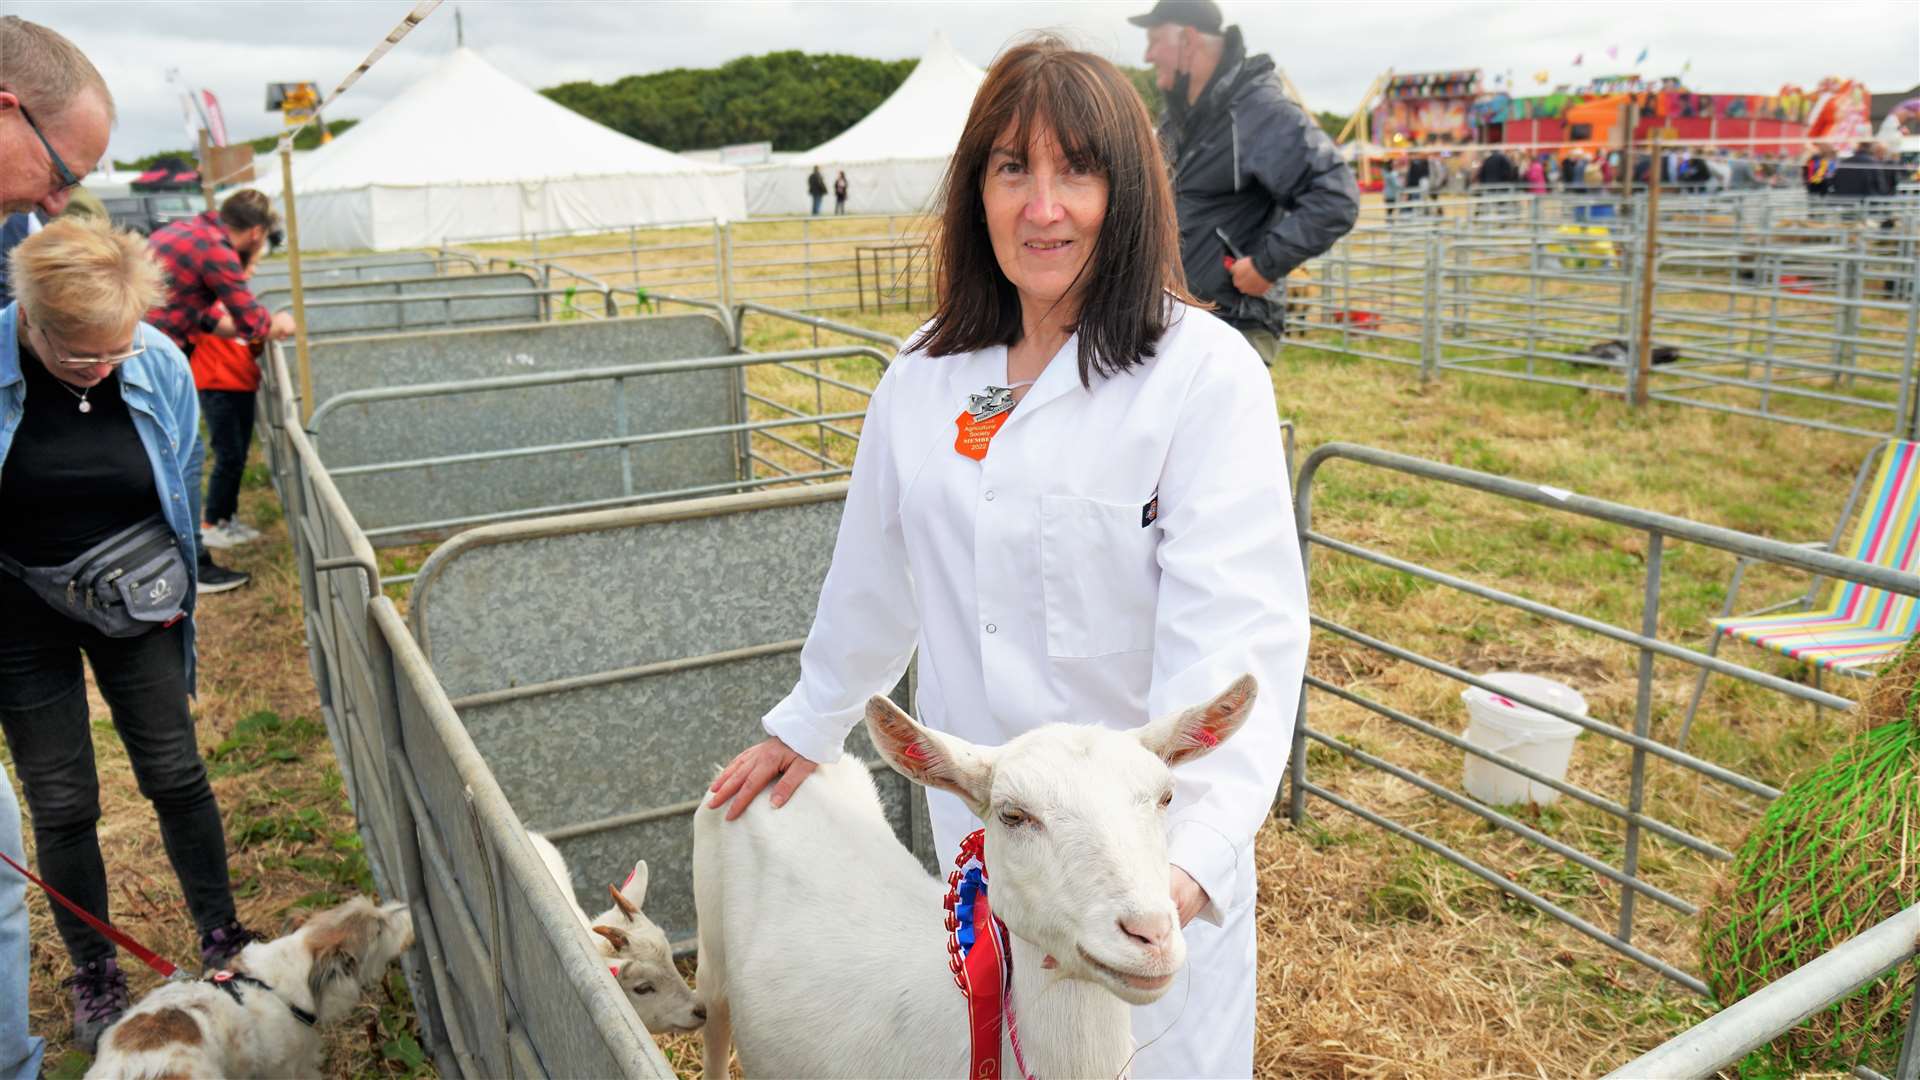 Bib Harrold with champion goat Dorothy at last year's County Show in Thurso. One of the key objectors to Watten Wind Farm, Bib claims that a fake document was sent in using her name to make it appear she supports the project. Picture: DGS